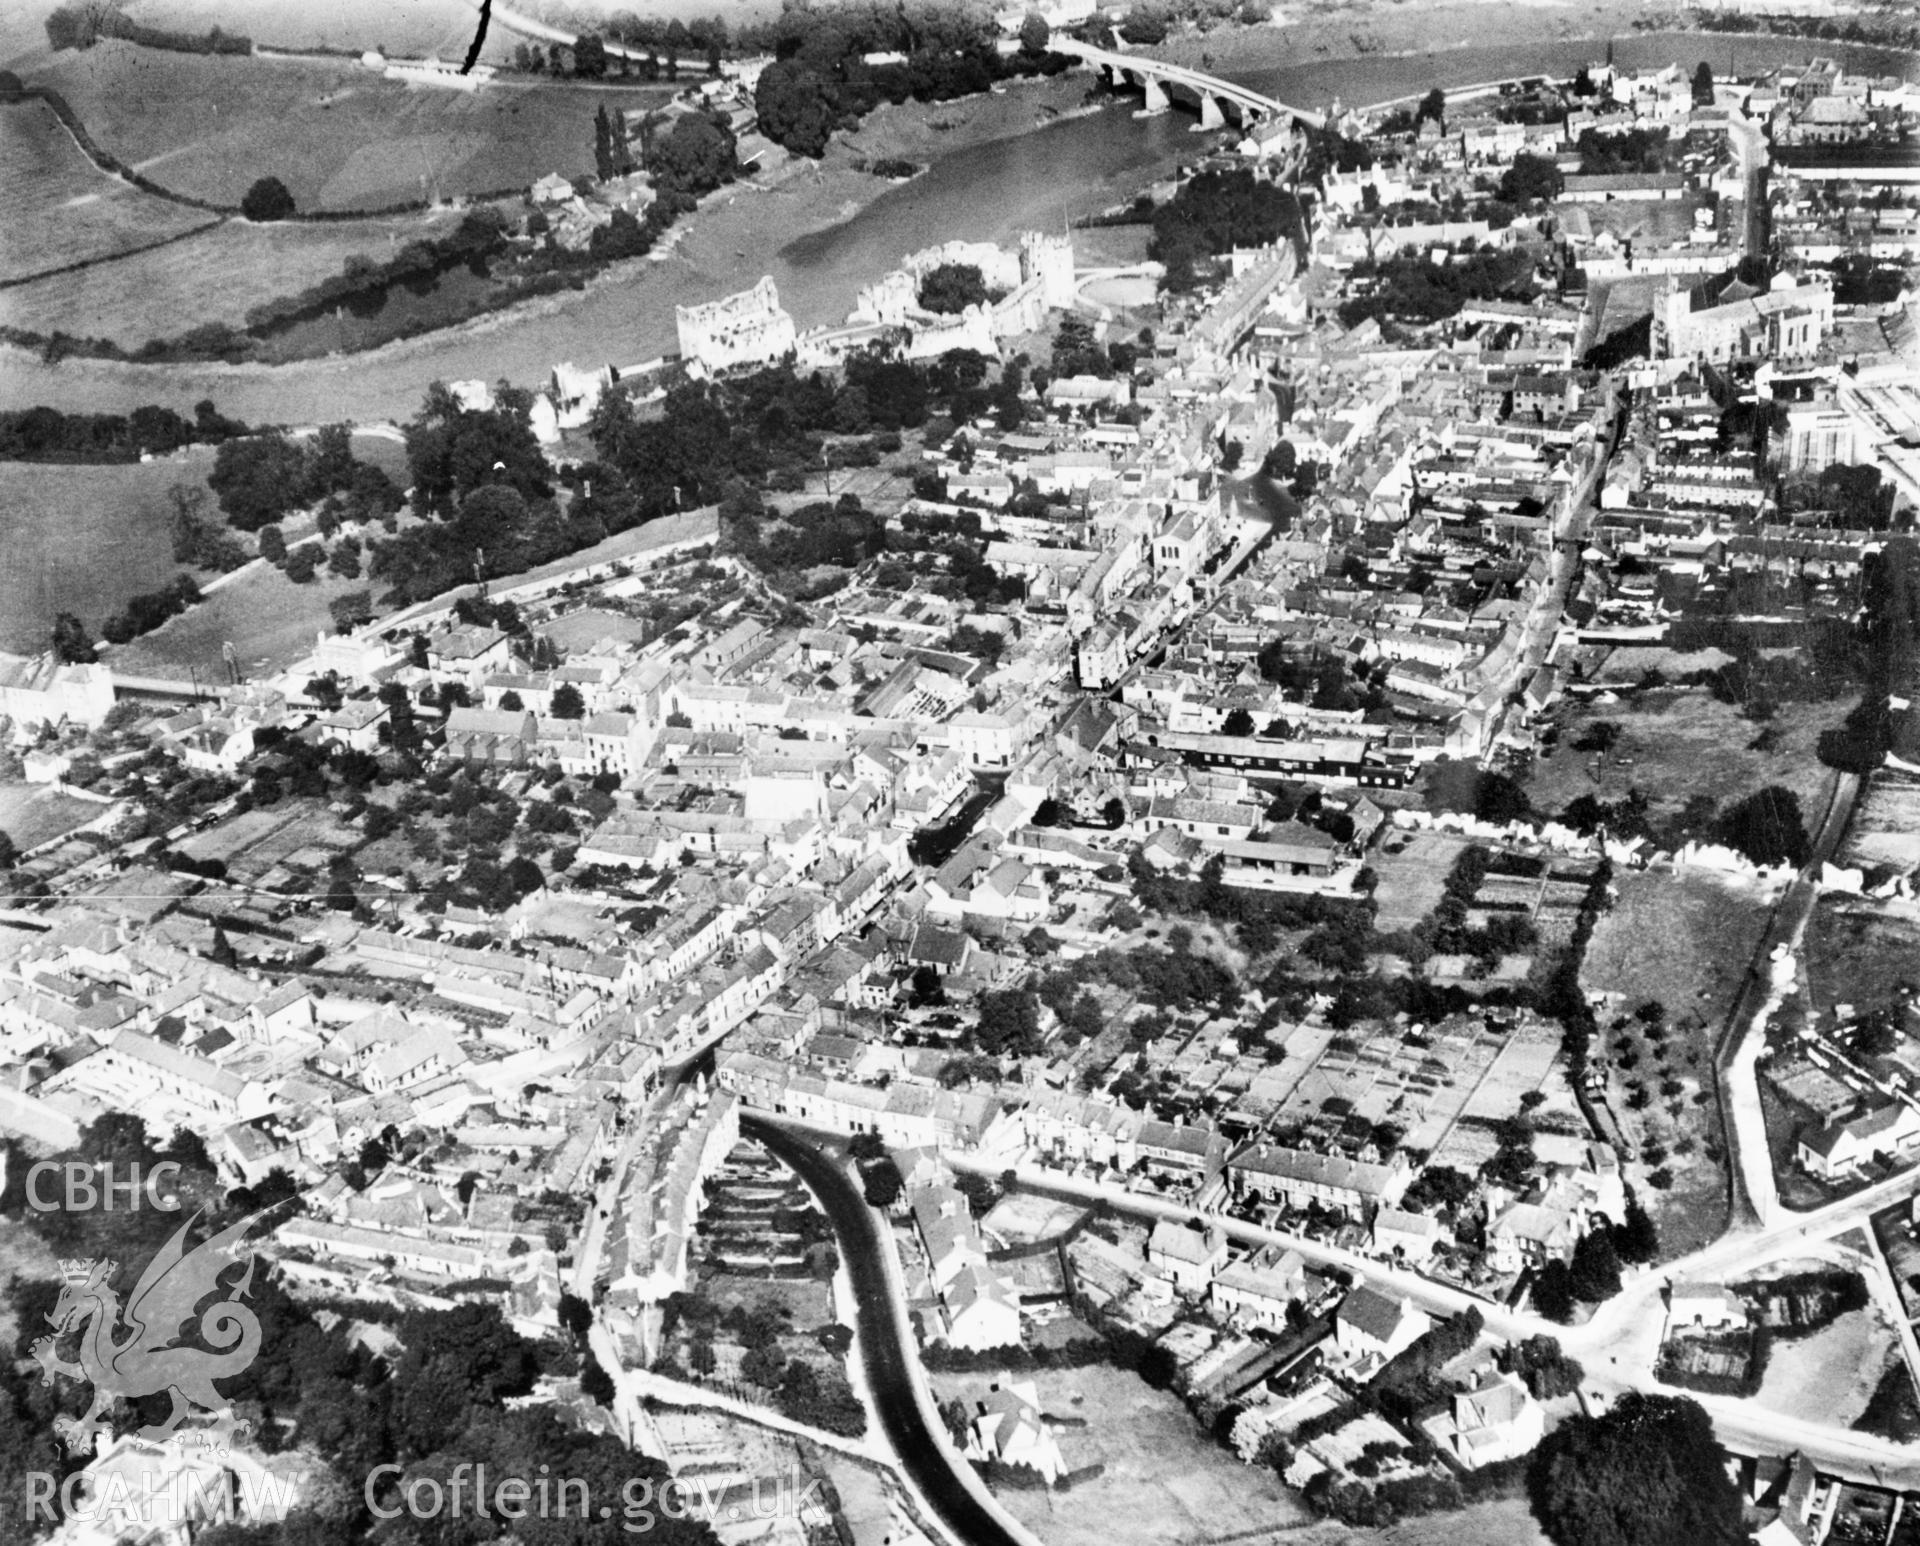 General view of Chepstow showing bridge. Oblique aerial photograph, 5?x4? BW glass plate.